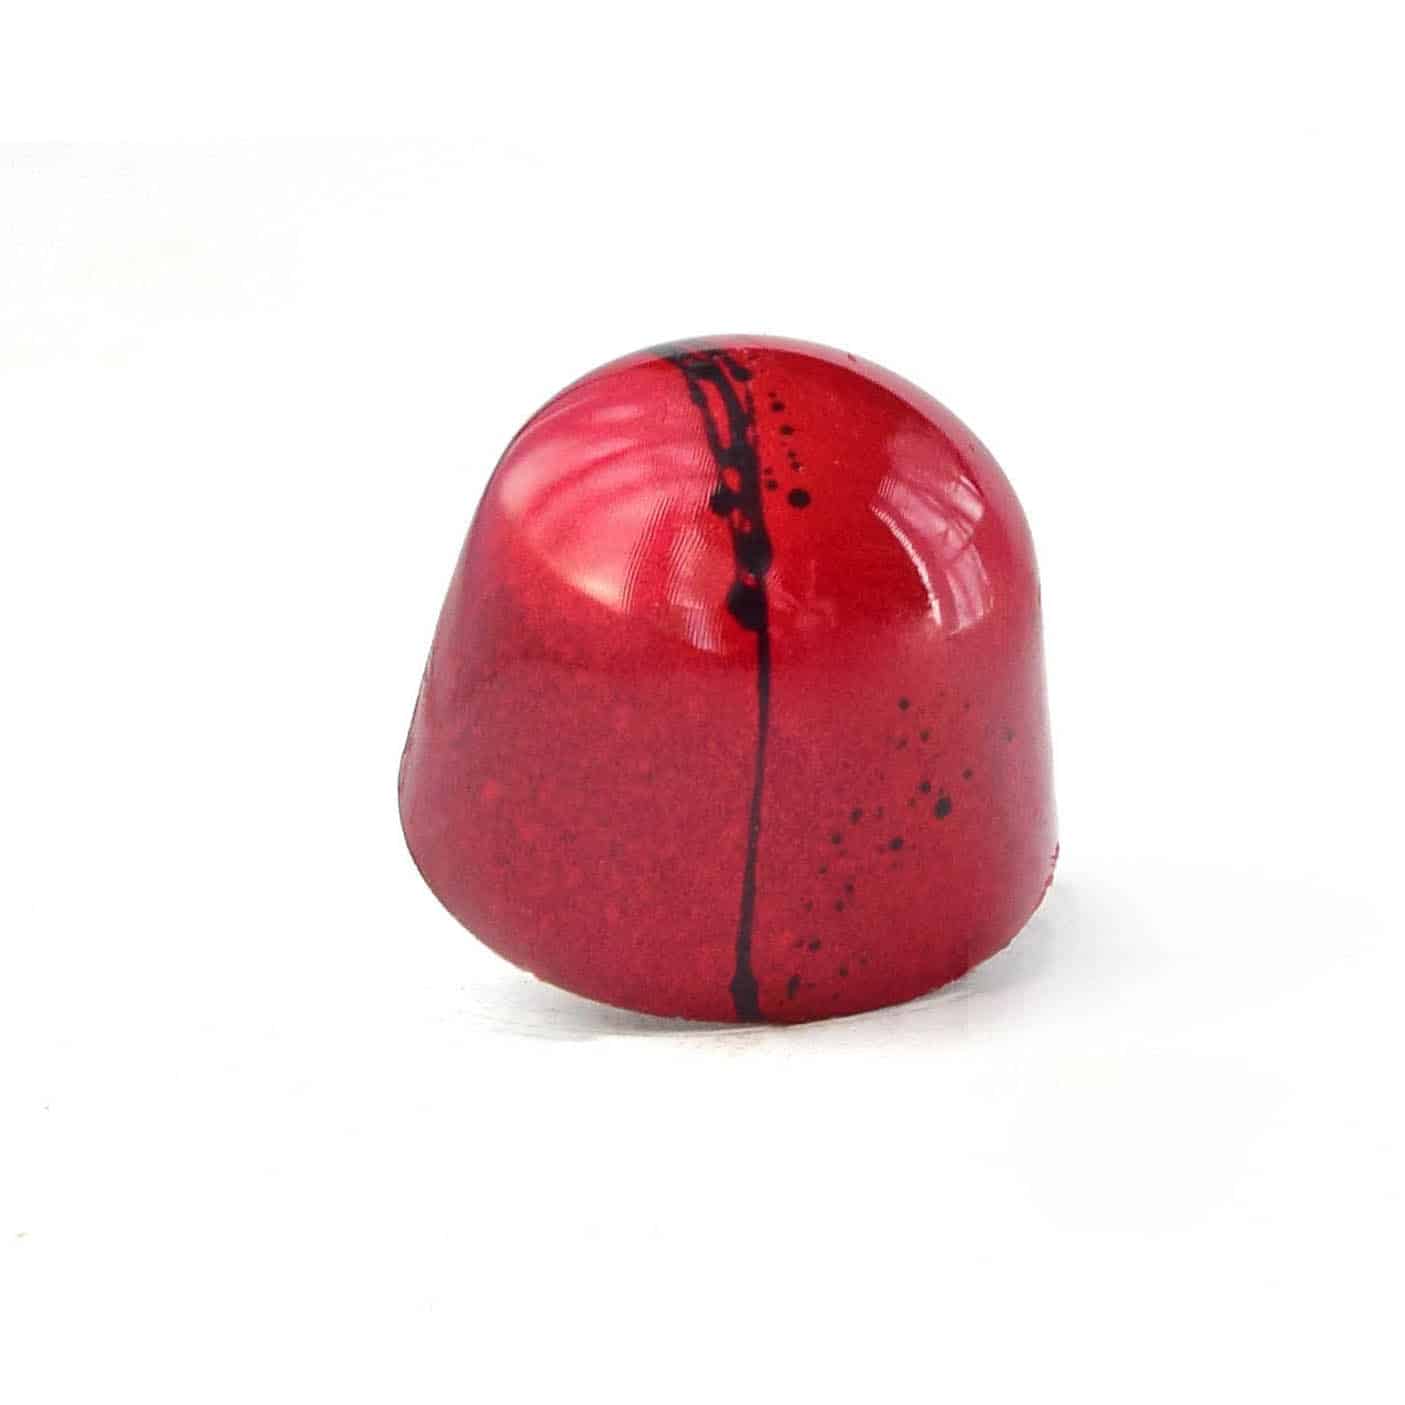 Side view of a red gourmet chocolate truffle with a black stripe; truffle tastes like strawberry and balsamic syrup